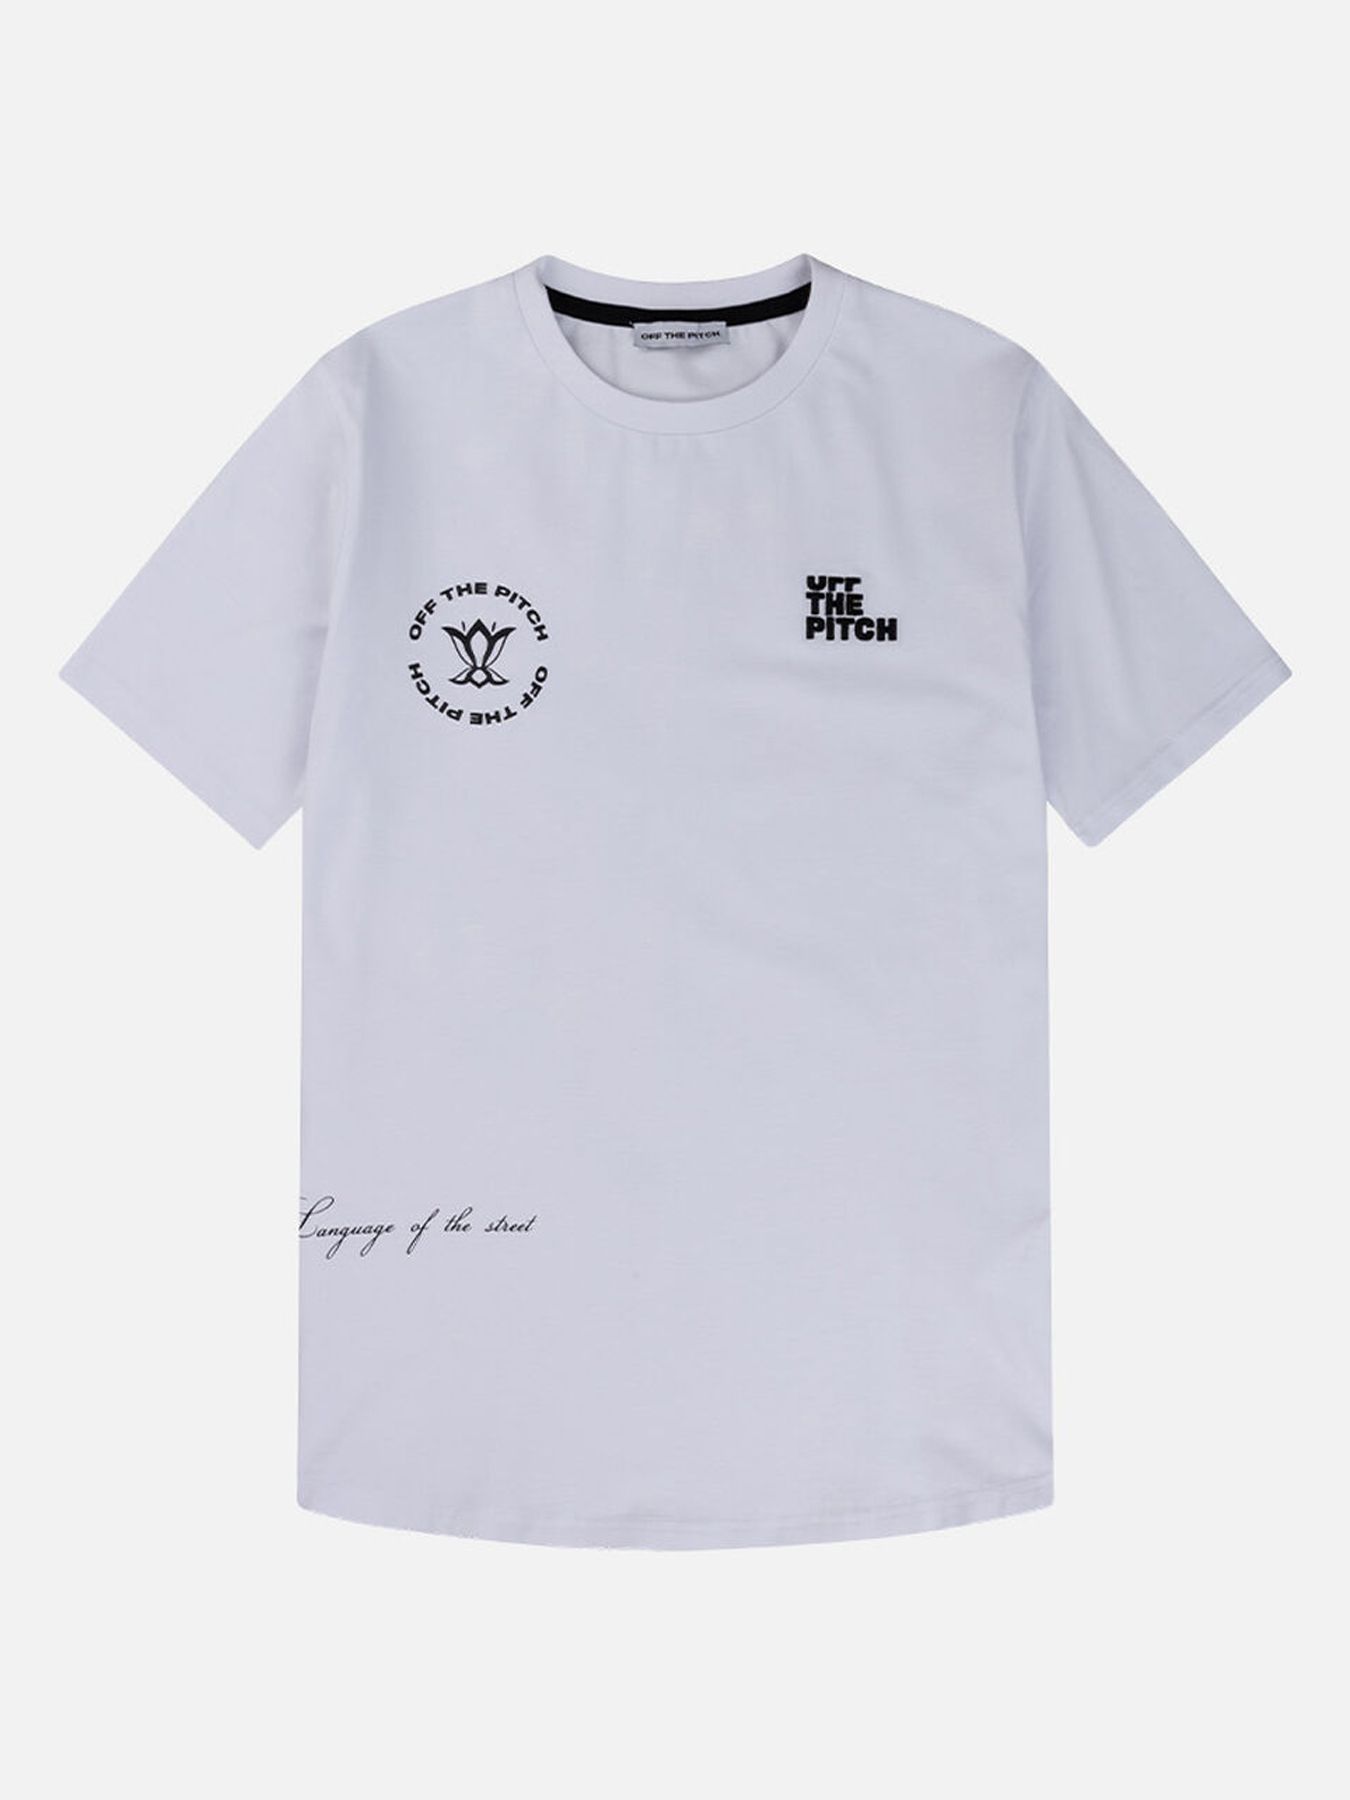 Off The Pitch Generation slim fit tee White 00108228-900